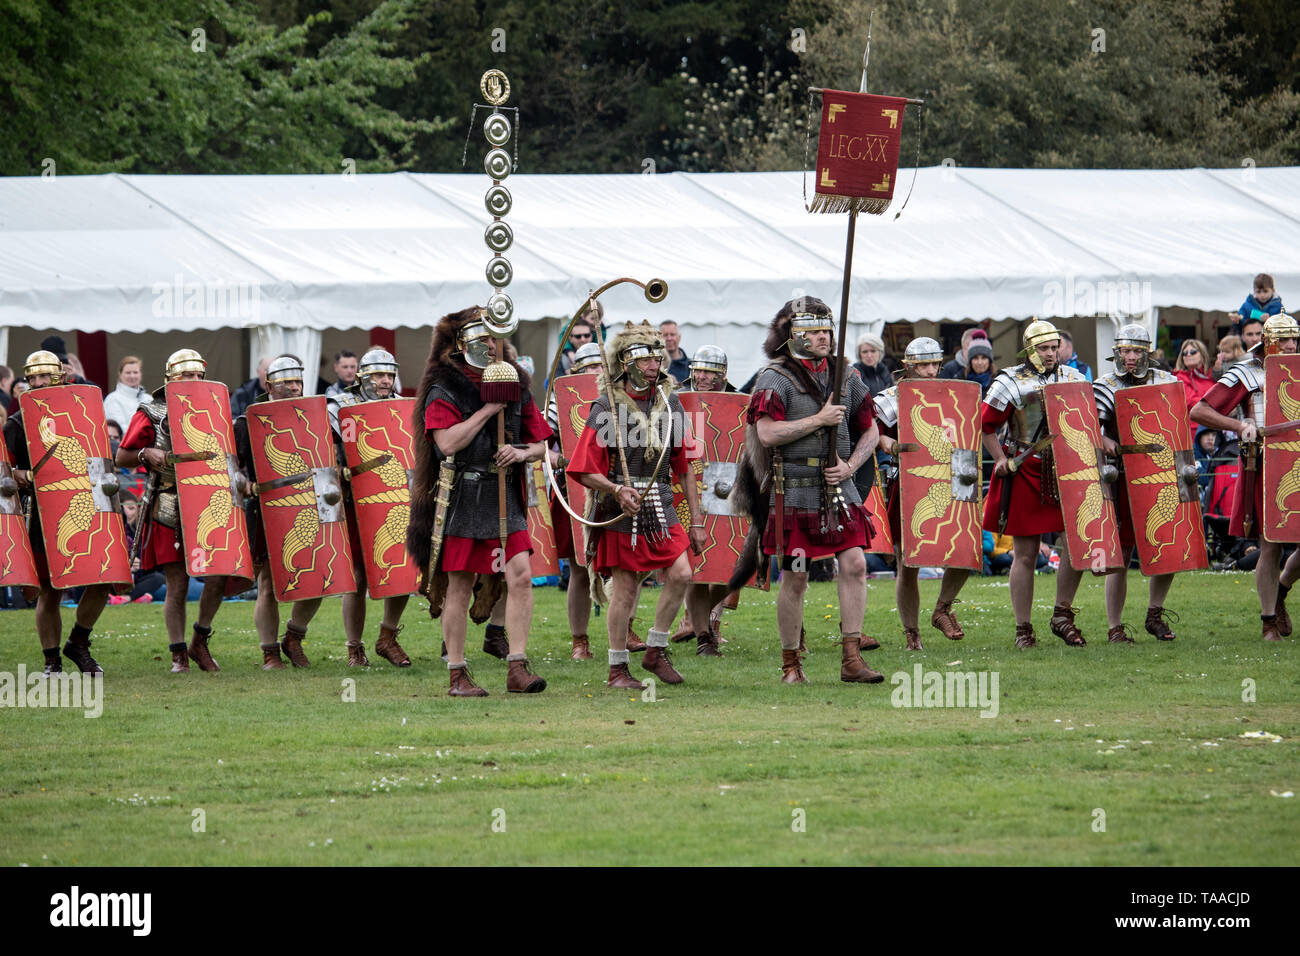 Ermine Street Guard show Imperial Roman Army at Wrest Park, England Stock Photo